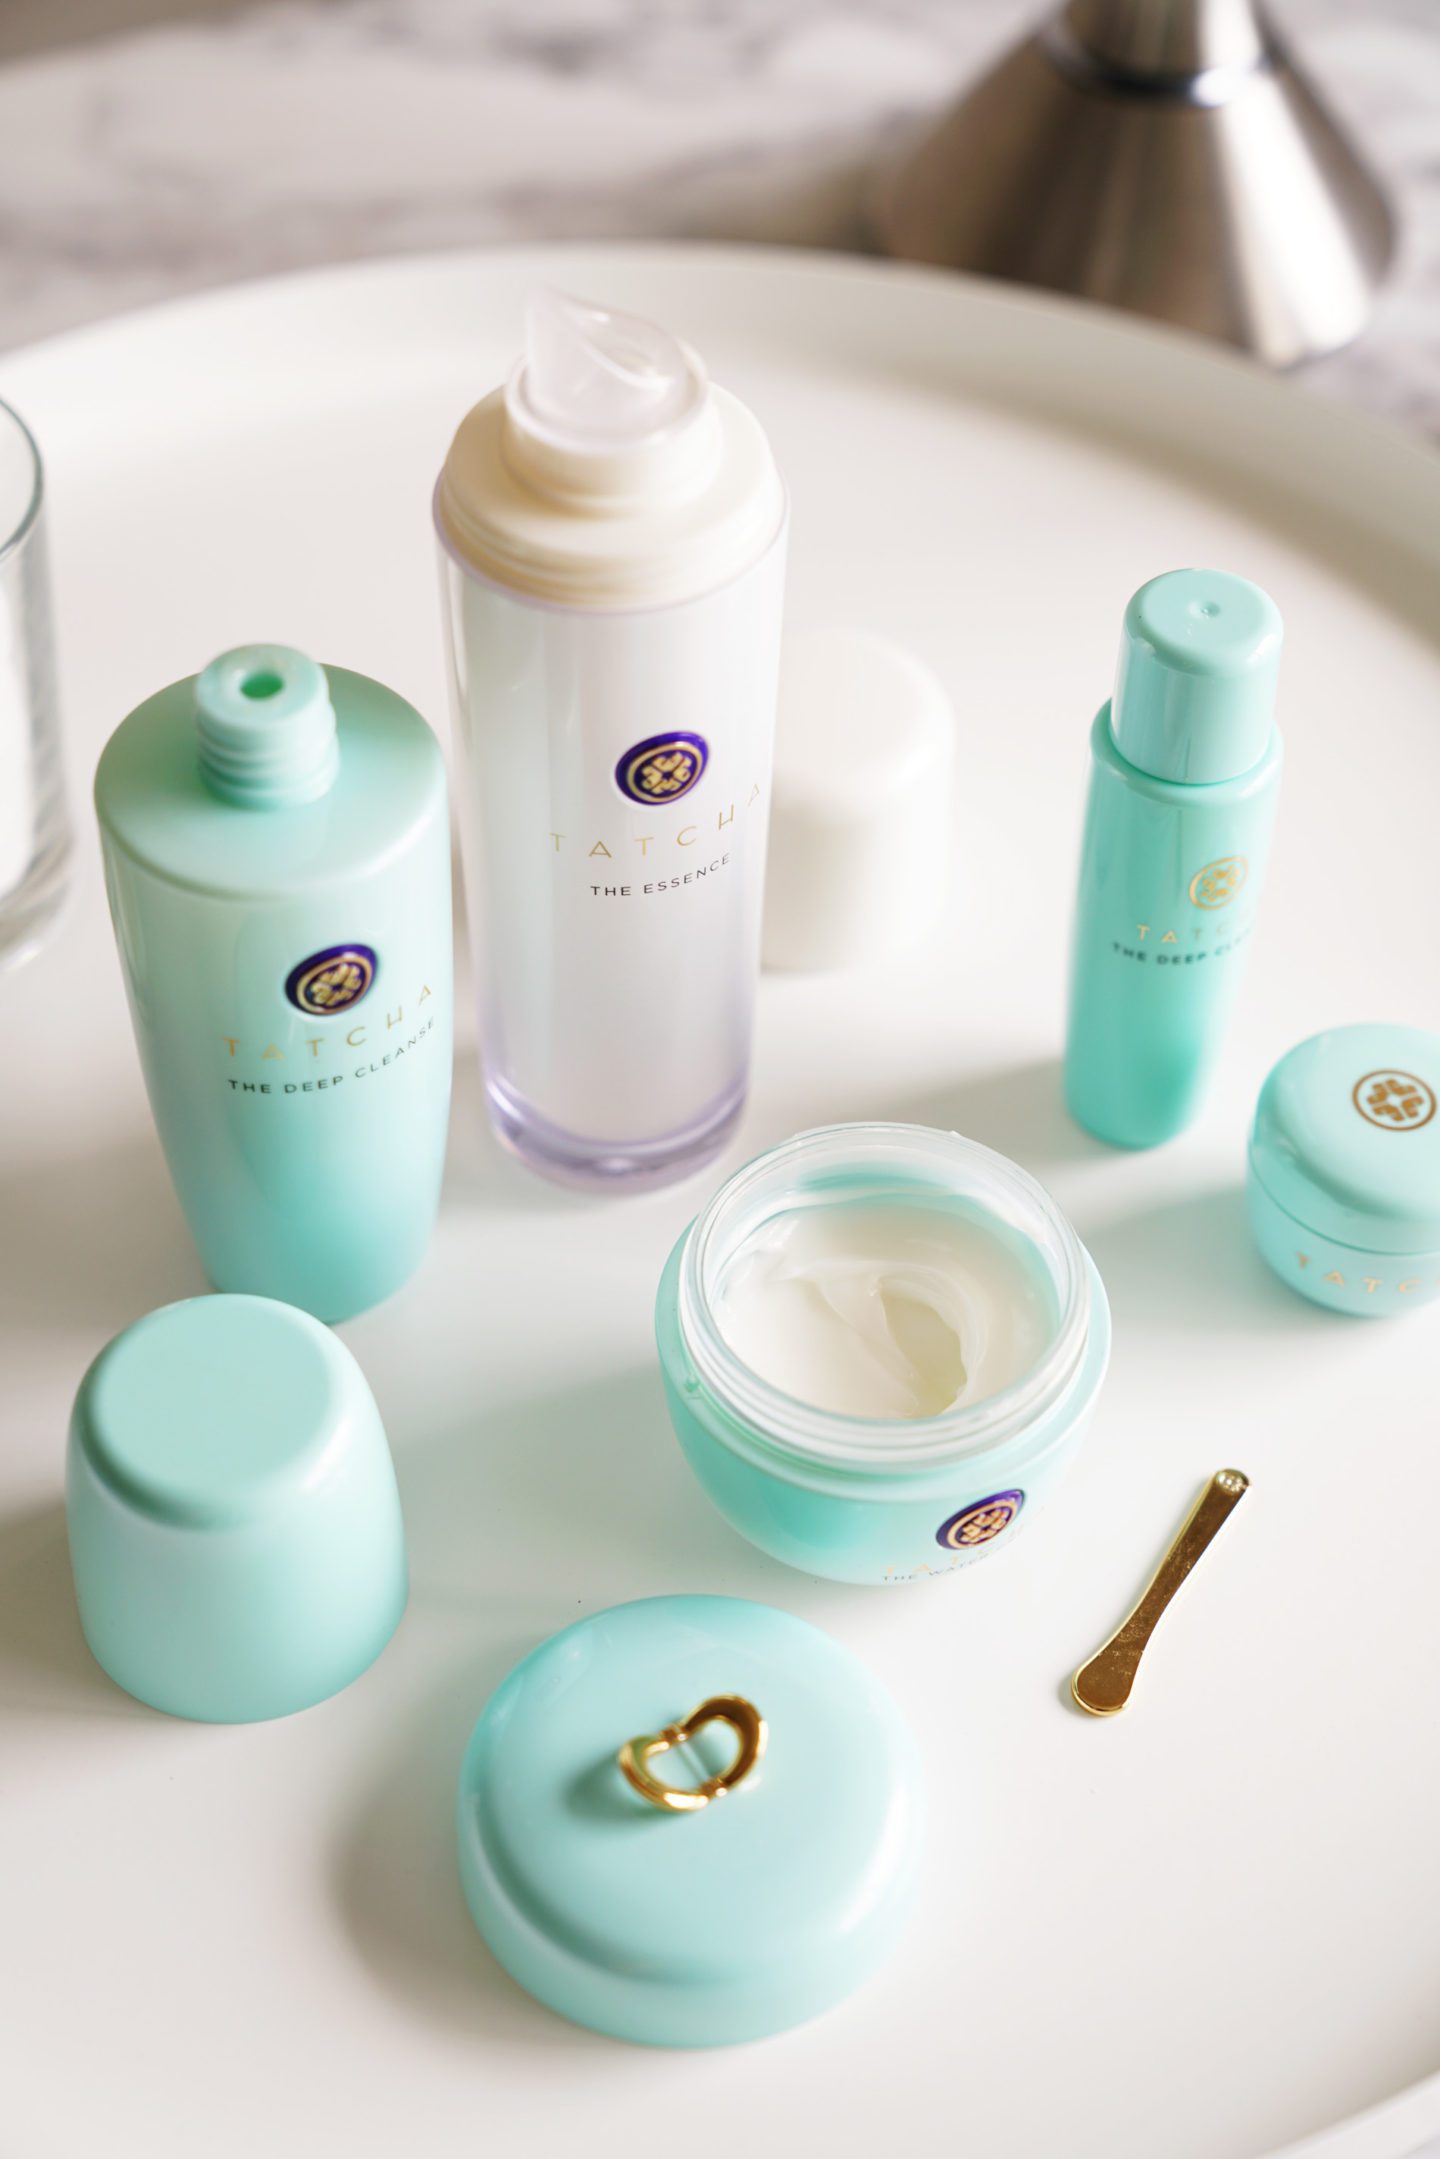 Tatcha The Deep Cleanse, Water Cream, Essence | The Beauty Look Book